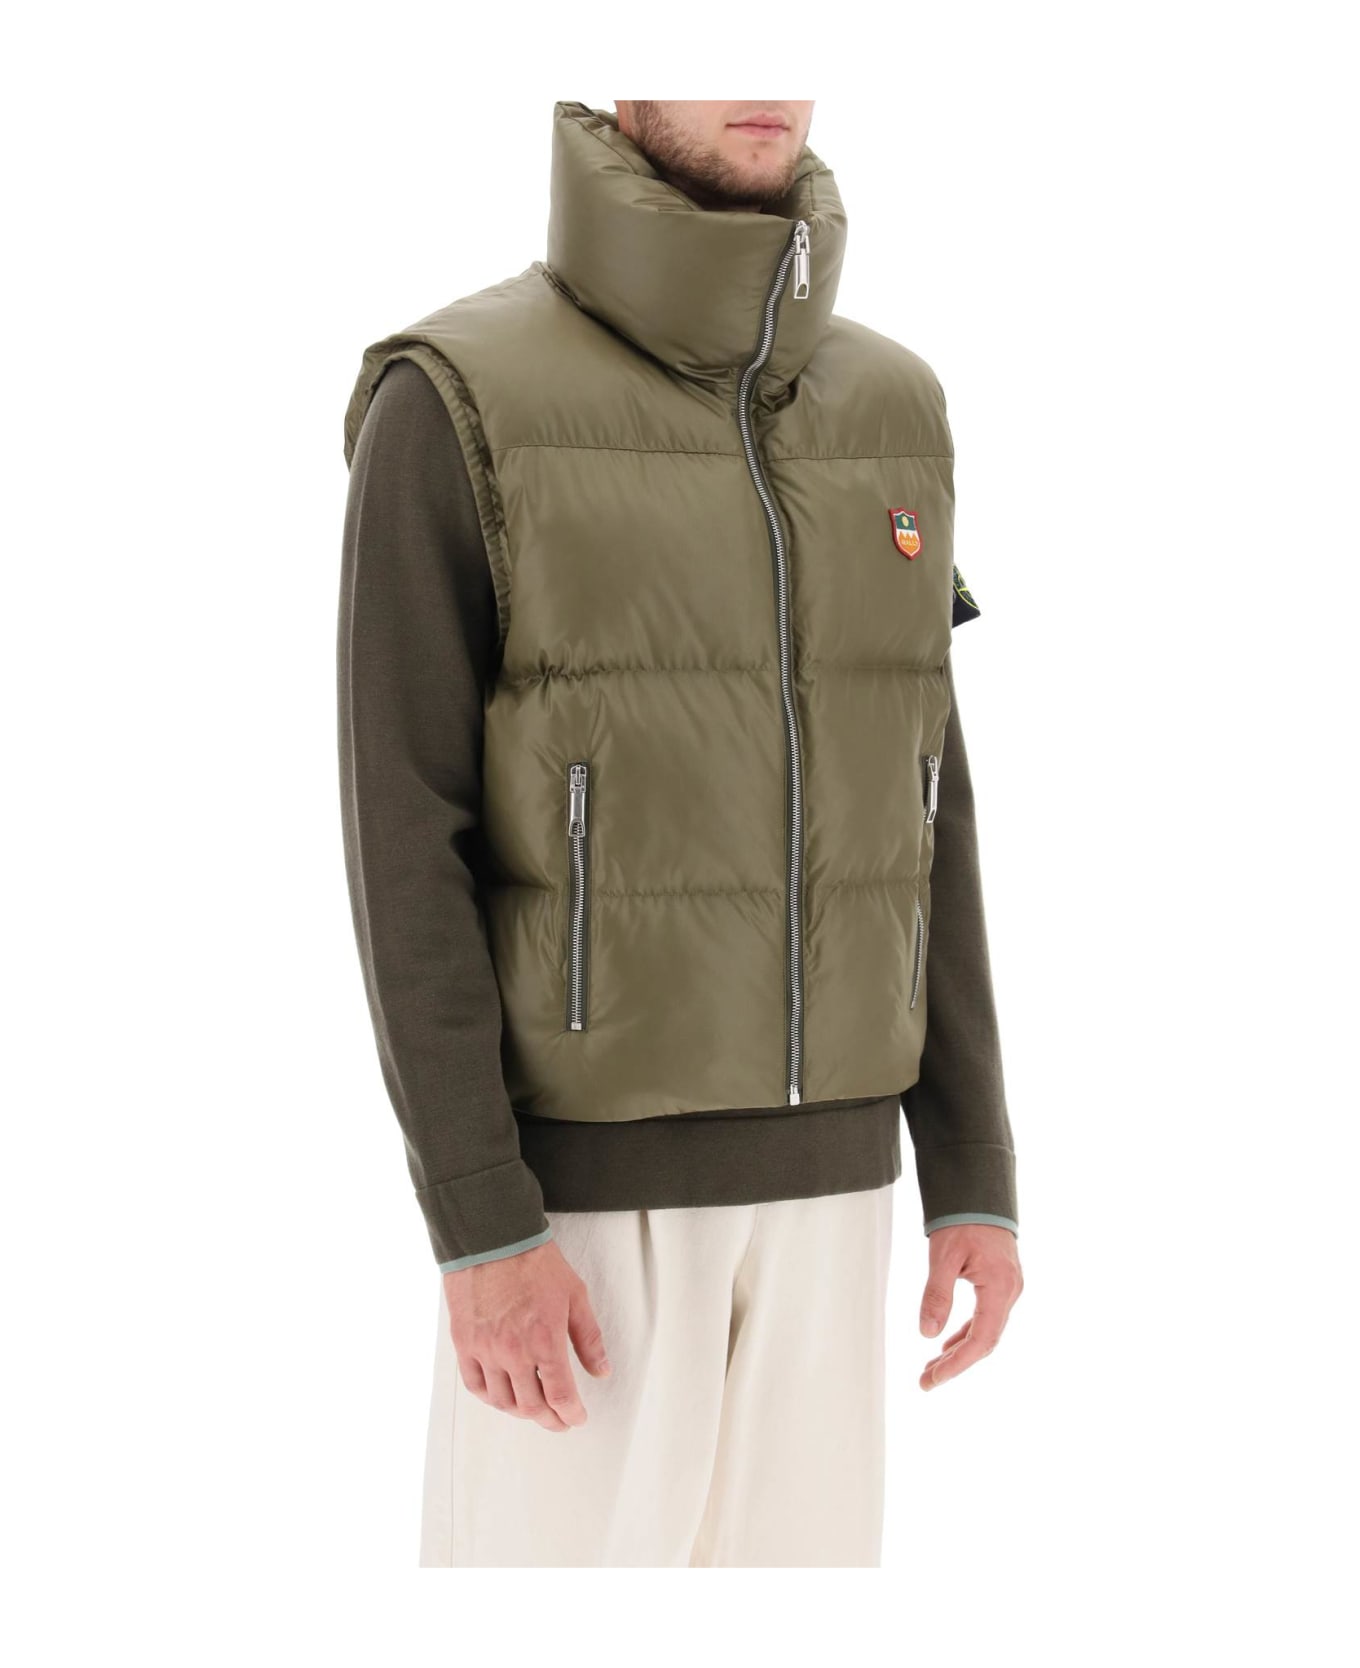 Bally Padded Vest In Ripstop - OLIVE GREEN 23 (Green)